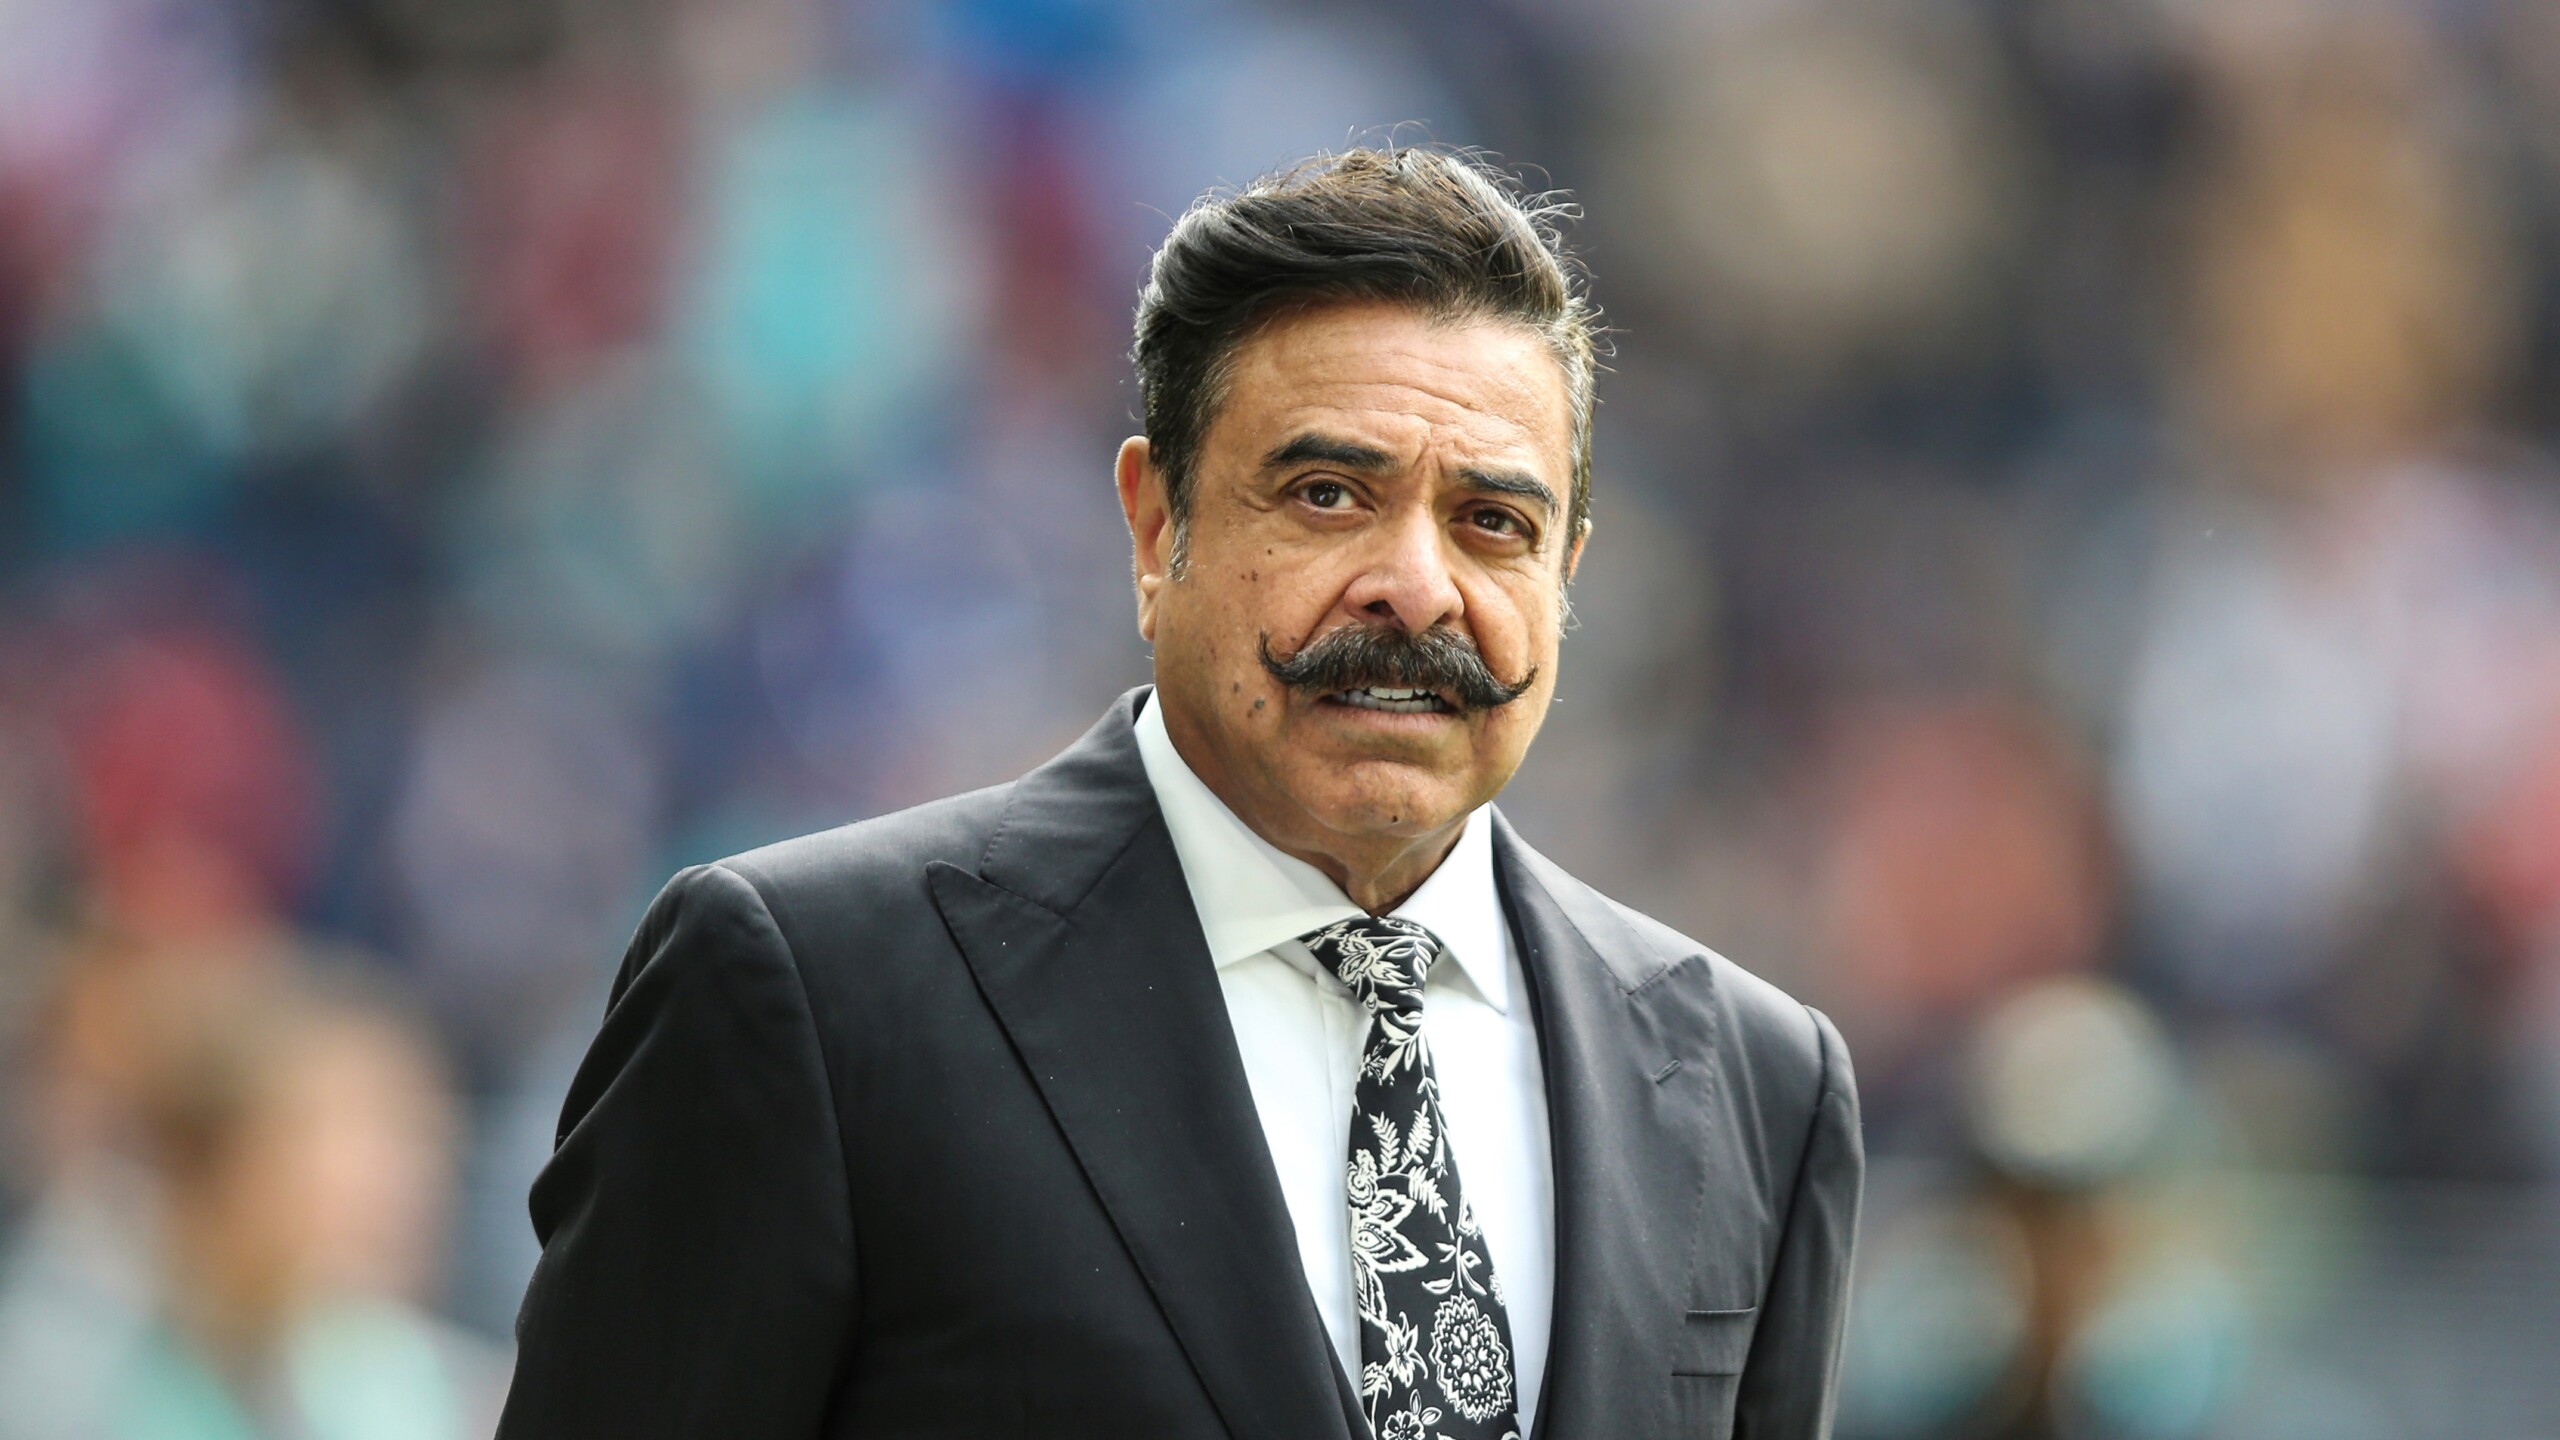 Featured image for “Jaguars owner Shad Khan’s net worth up more than 50%, per Forbes”